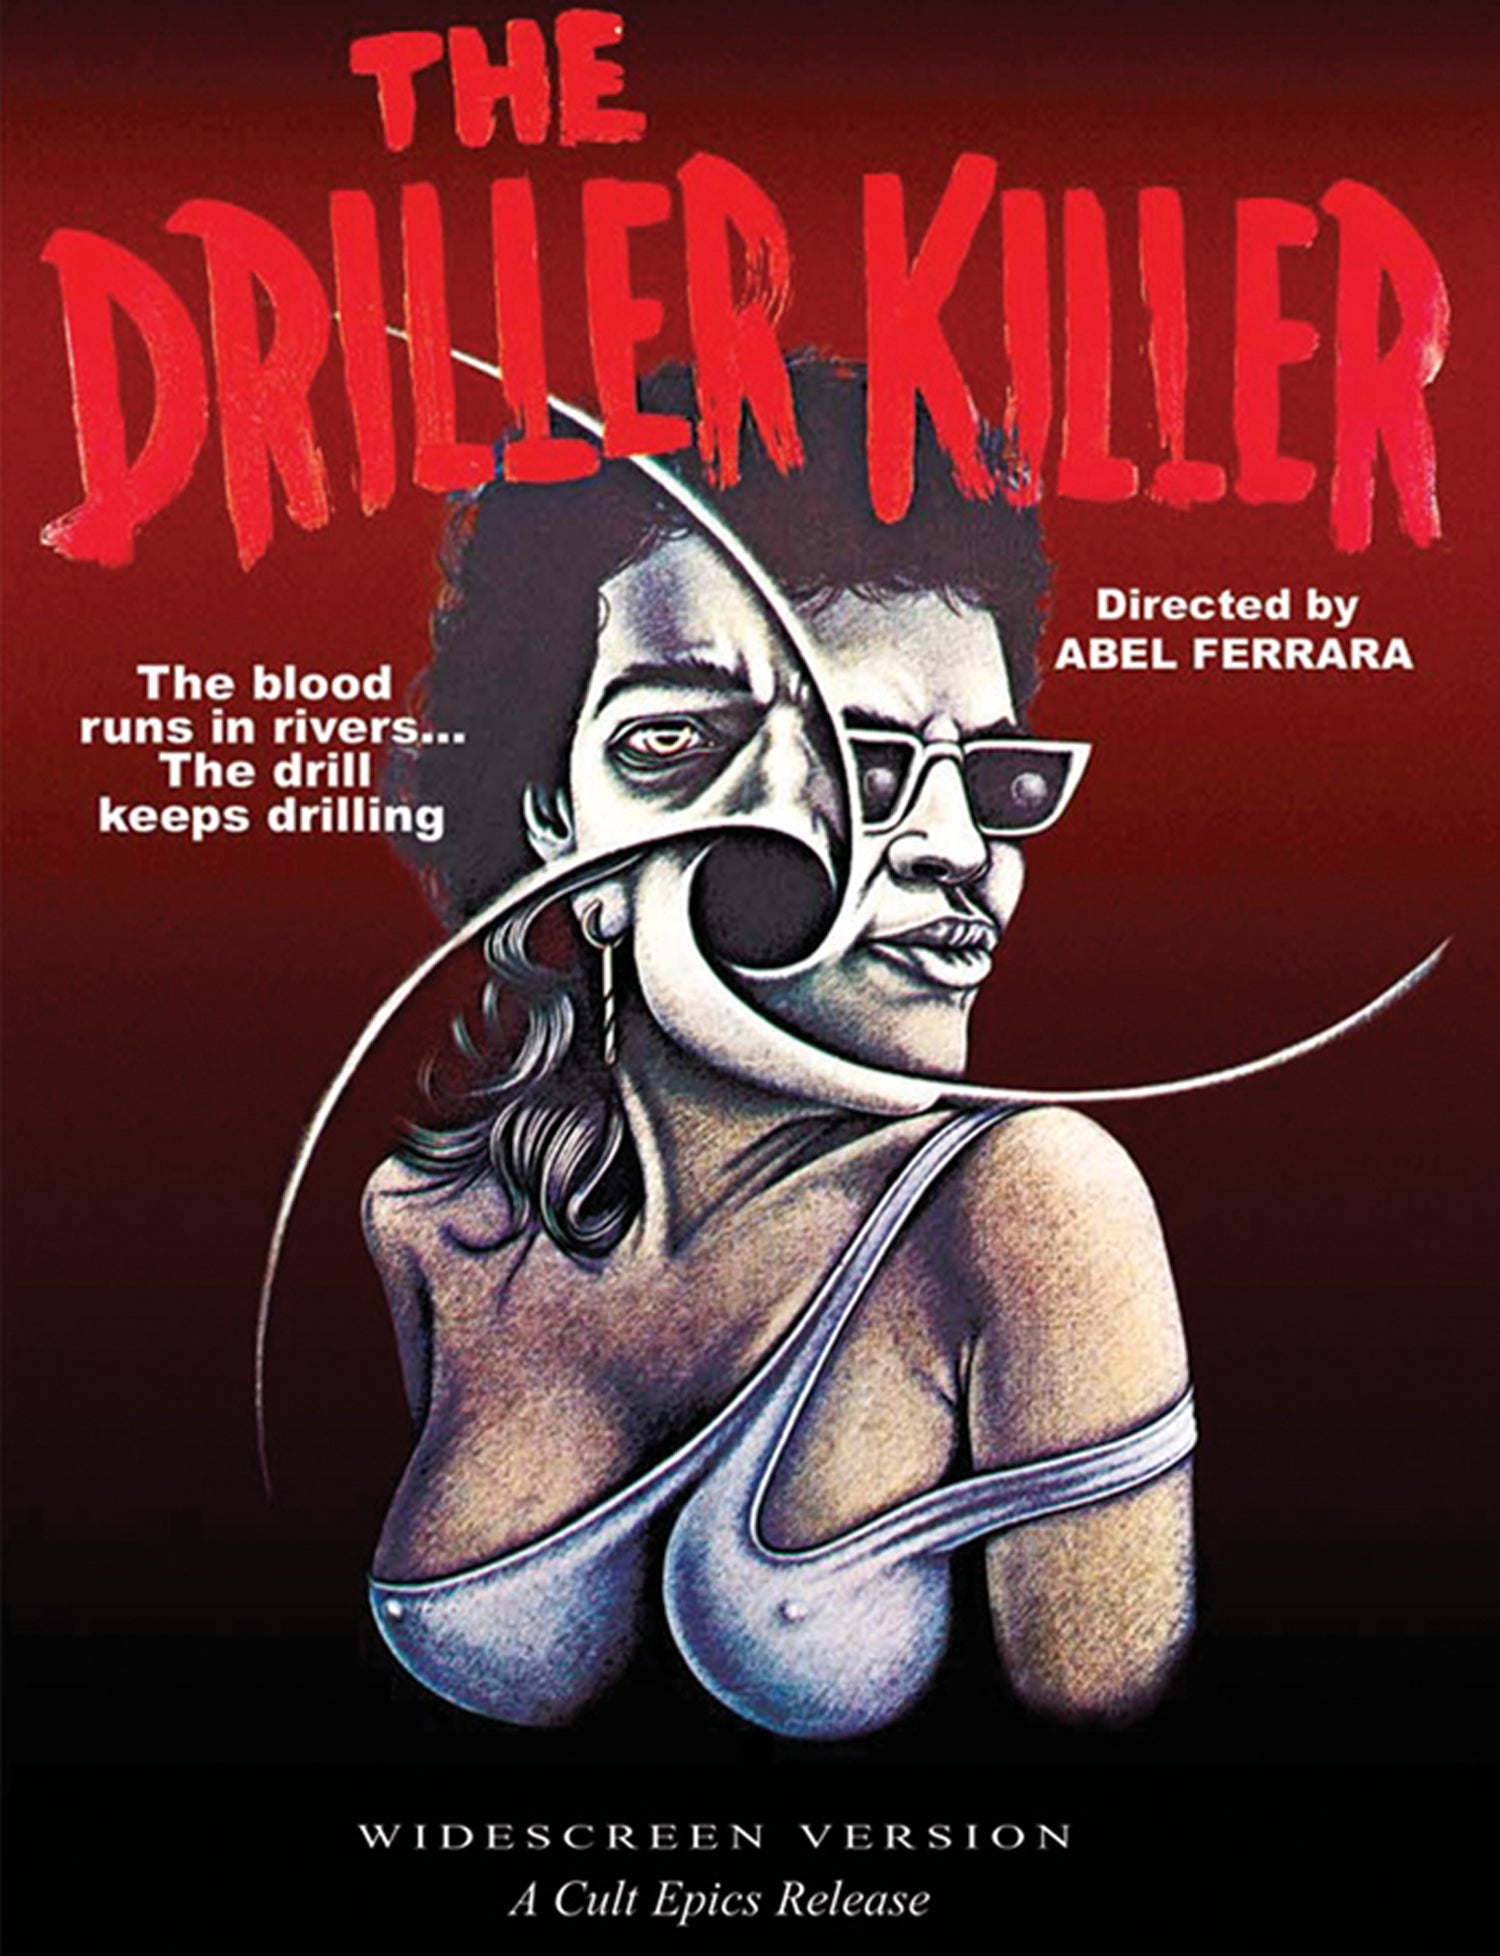 THE DRILLER KILLER (2-DISC LIMITED EDITION) DVD